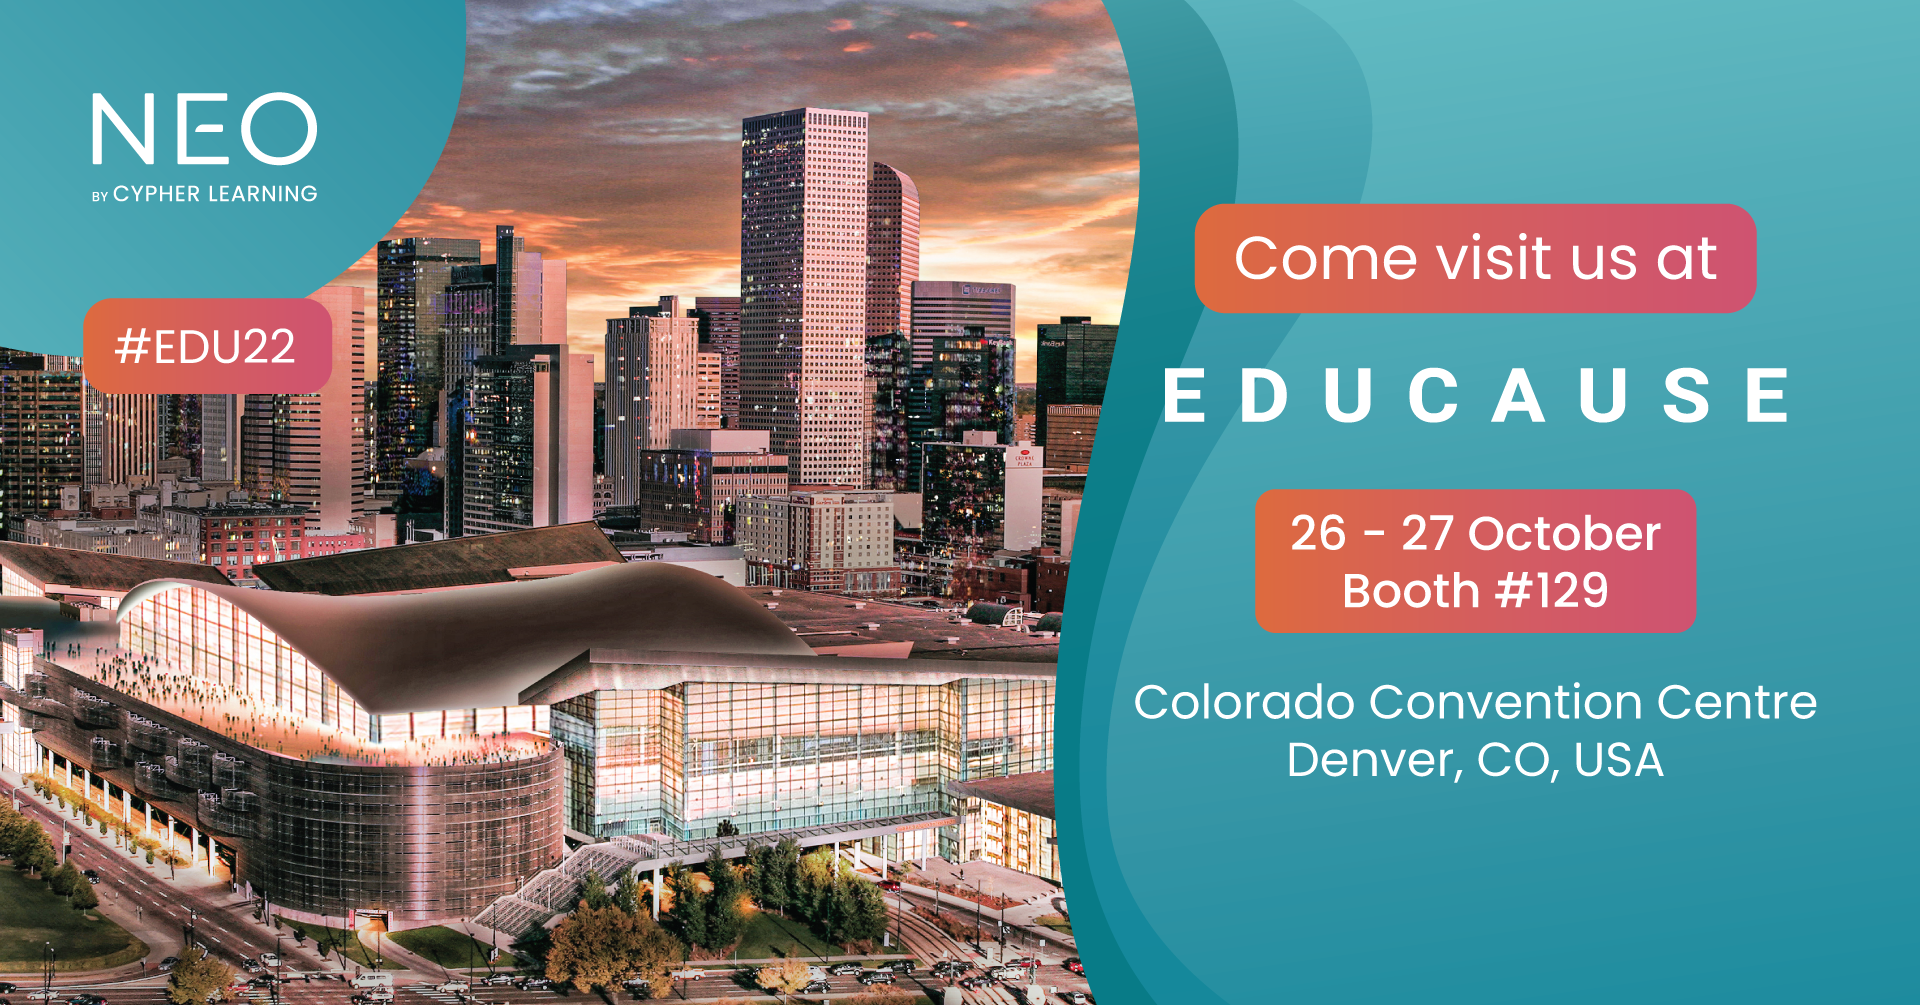 Meet CYPHER LEARNING at EDUCAUSE 2022: demos, speaking sessions and special surprises